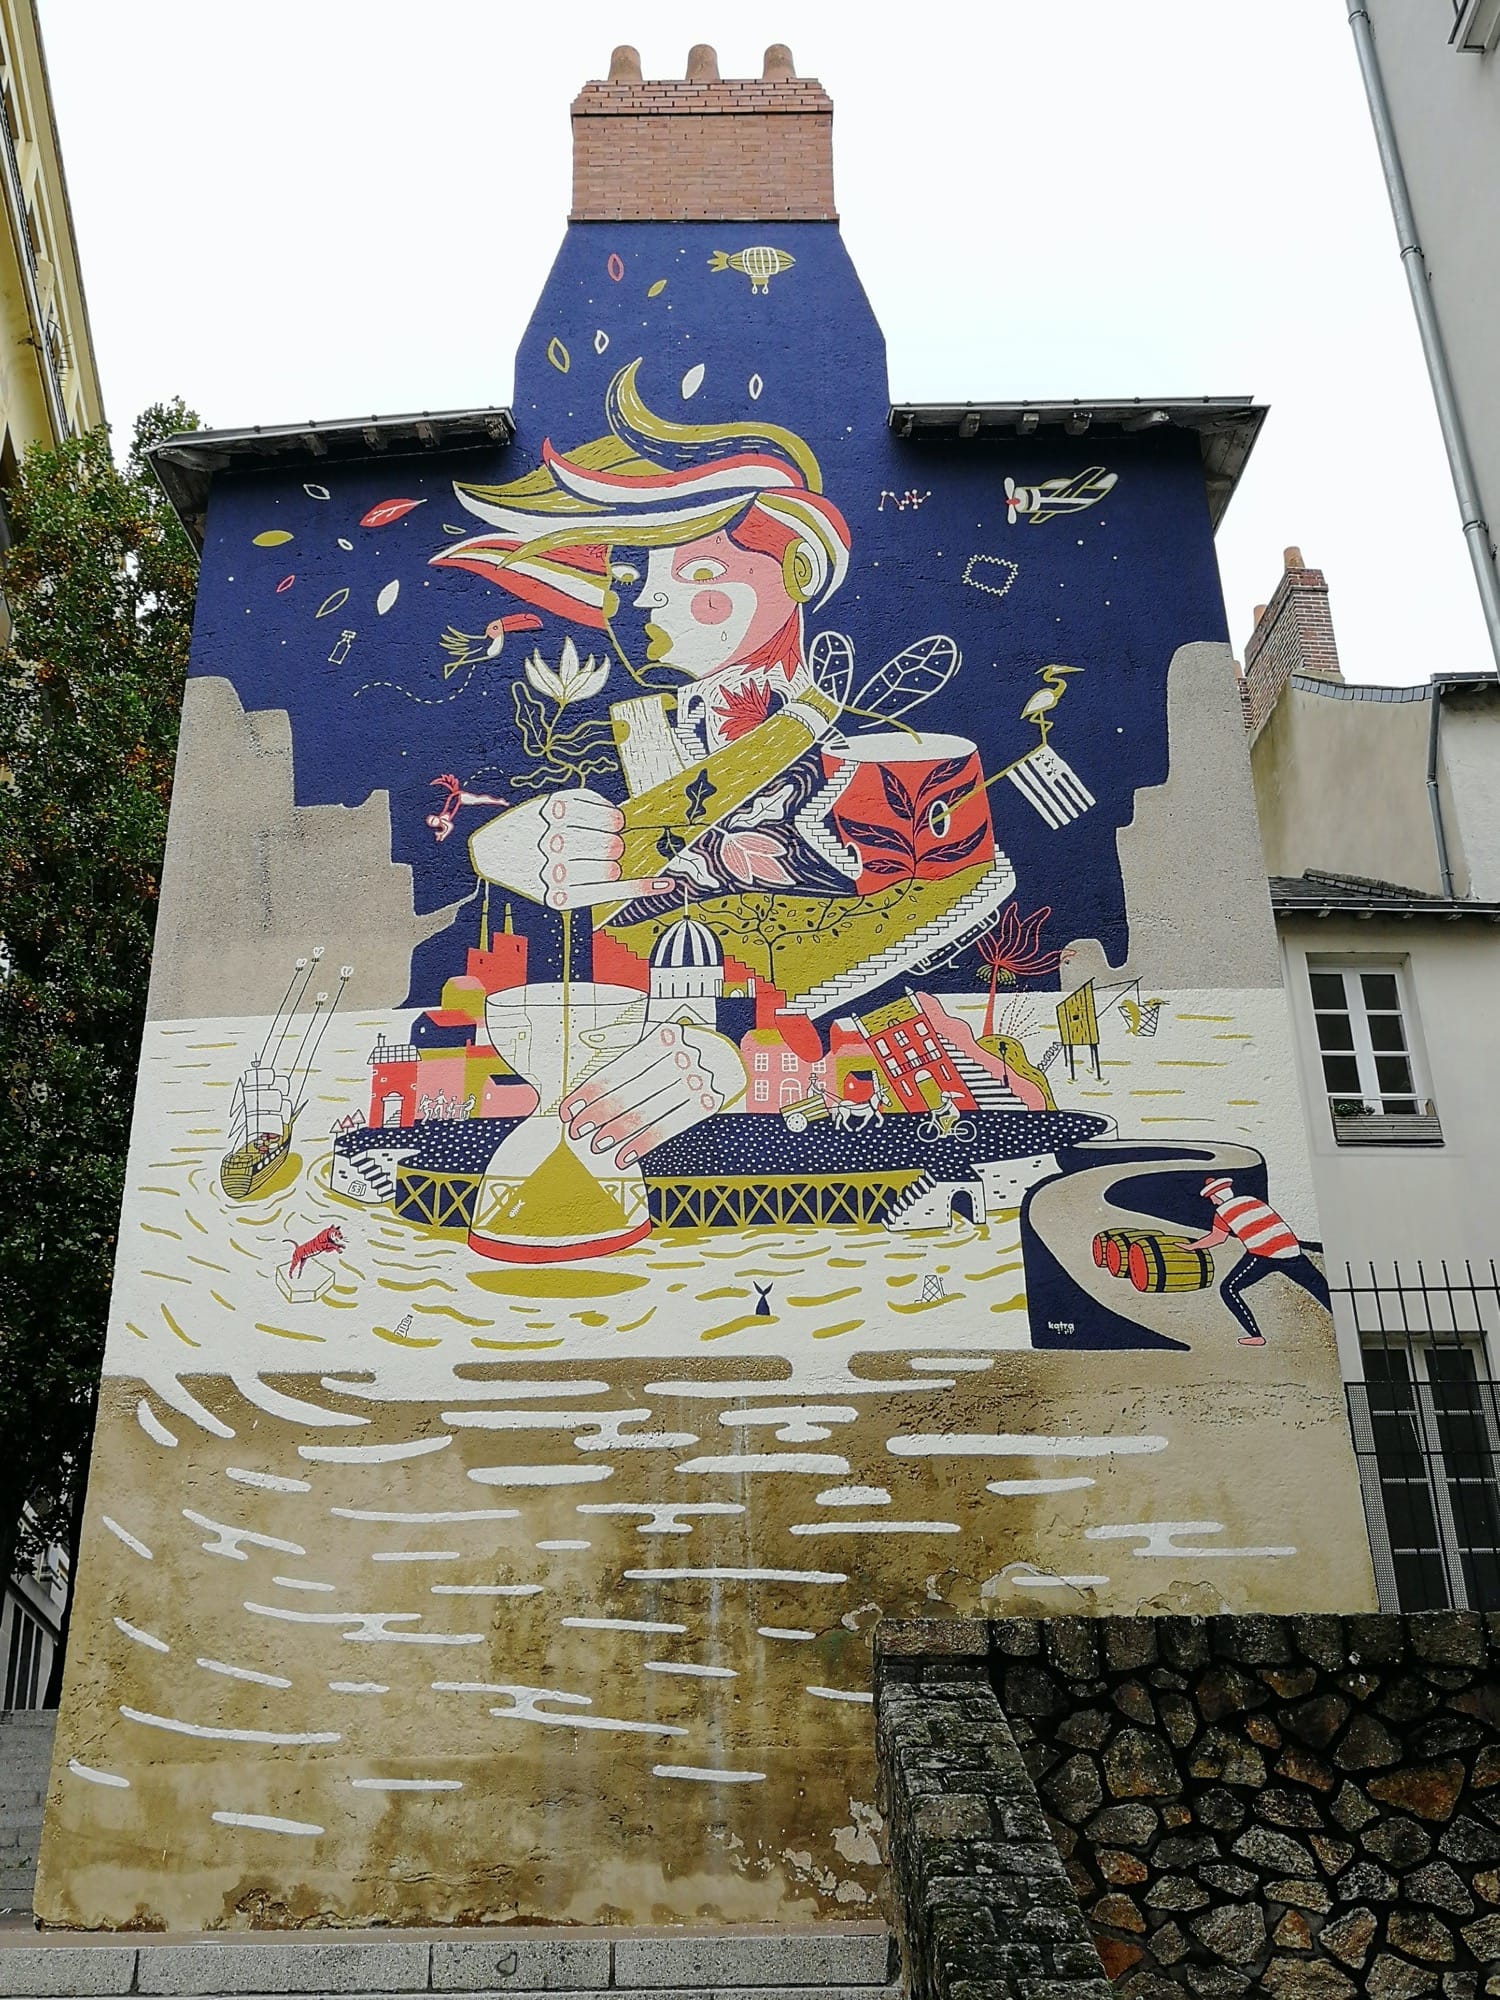 Graffiti 3001  captured by Rabot in Nantes France